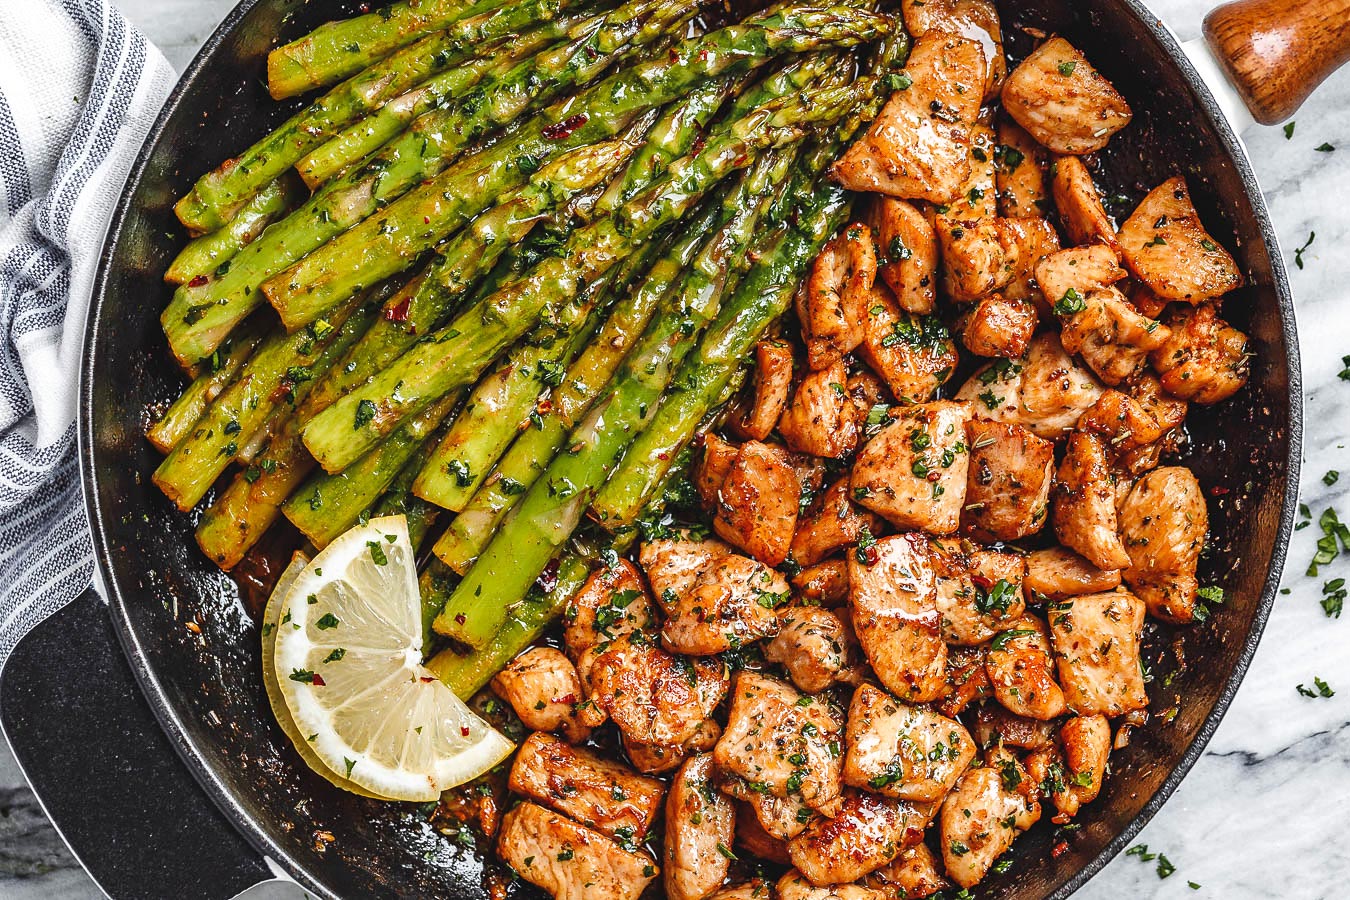 48 Simple One-Skillet Meal Recipes Everyone Will Rave About